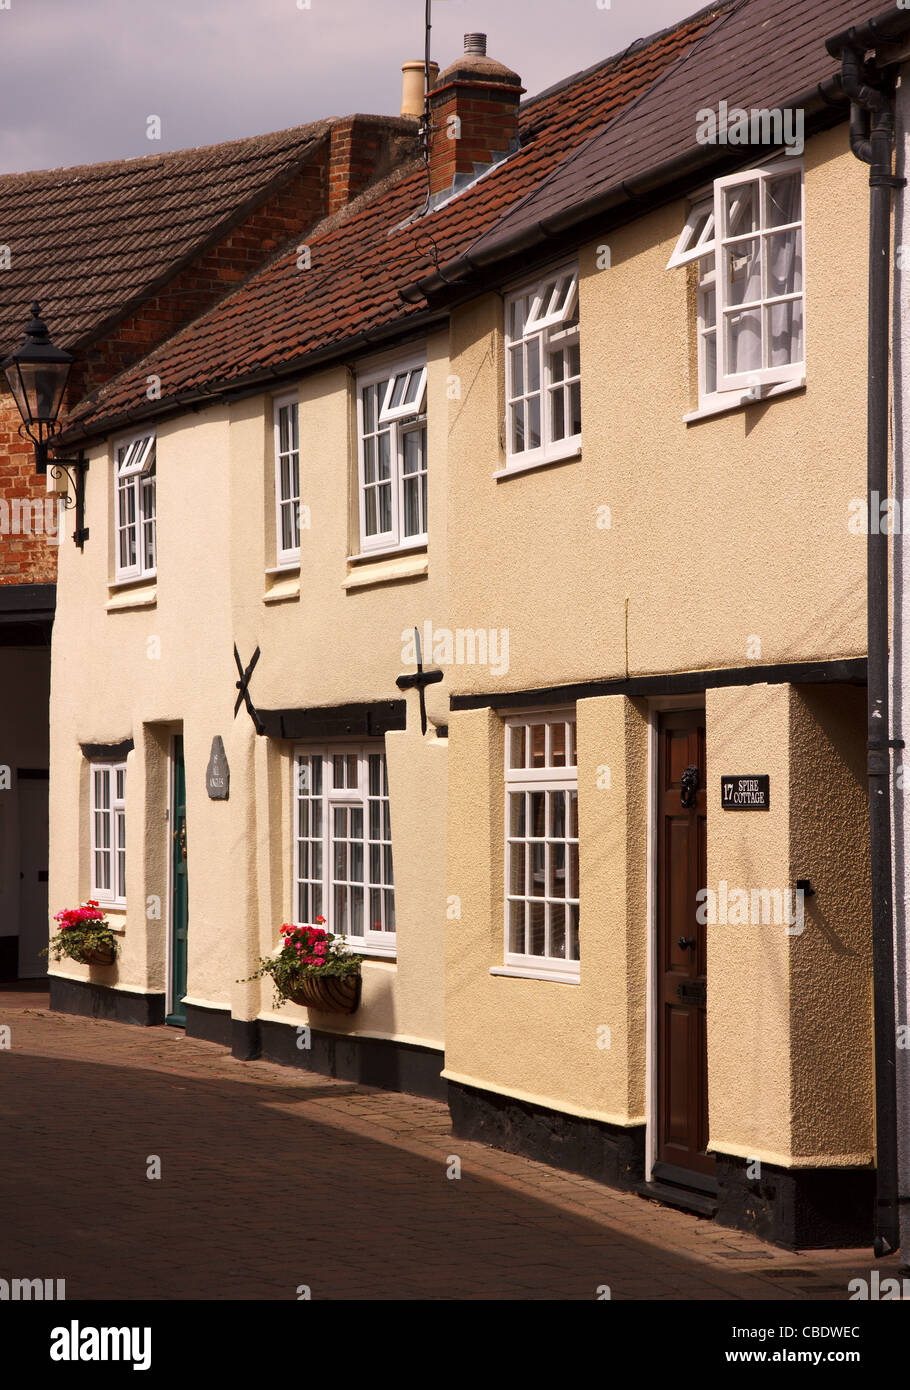 Terraced row of beautiful old painted English cottages in narrow back street, Dean's Street, Oakham, Rutland, England, UK Stock Photo